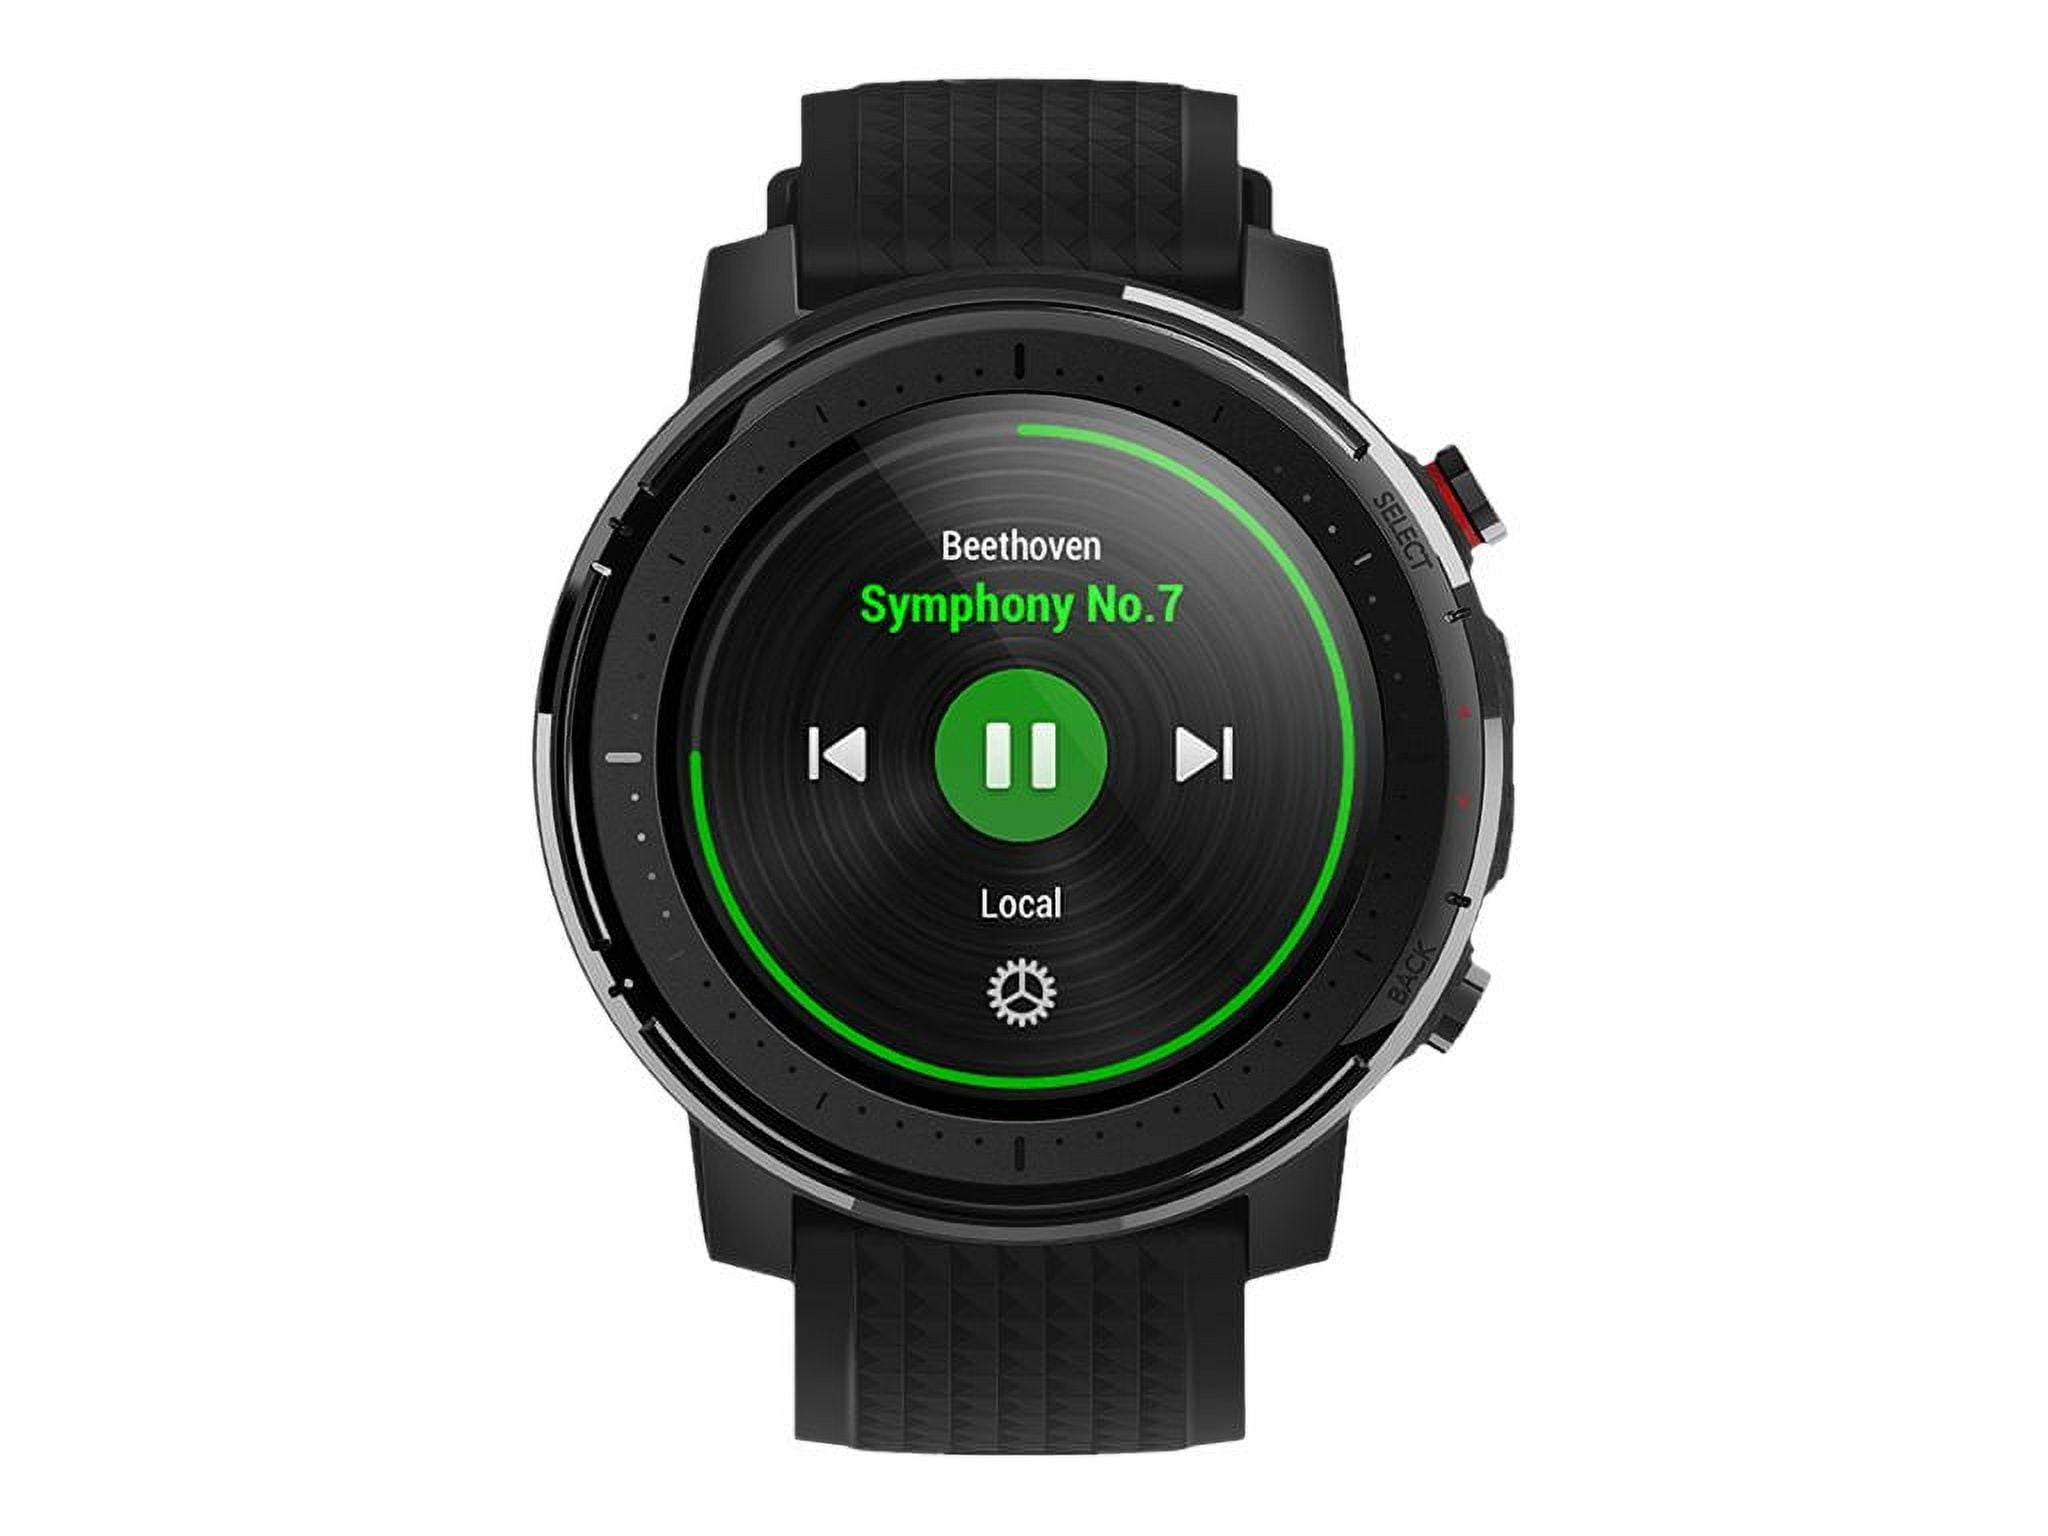 Amazfit Stratos 3 - 48.6 mm - black - sport watch with strap - silicone -  black - wrist size: 4.72 in - 7.68 in - display 1.34 - Wi-Fi, Bluetooth 